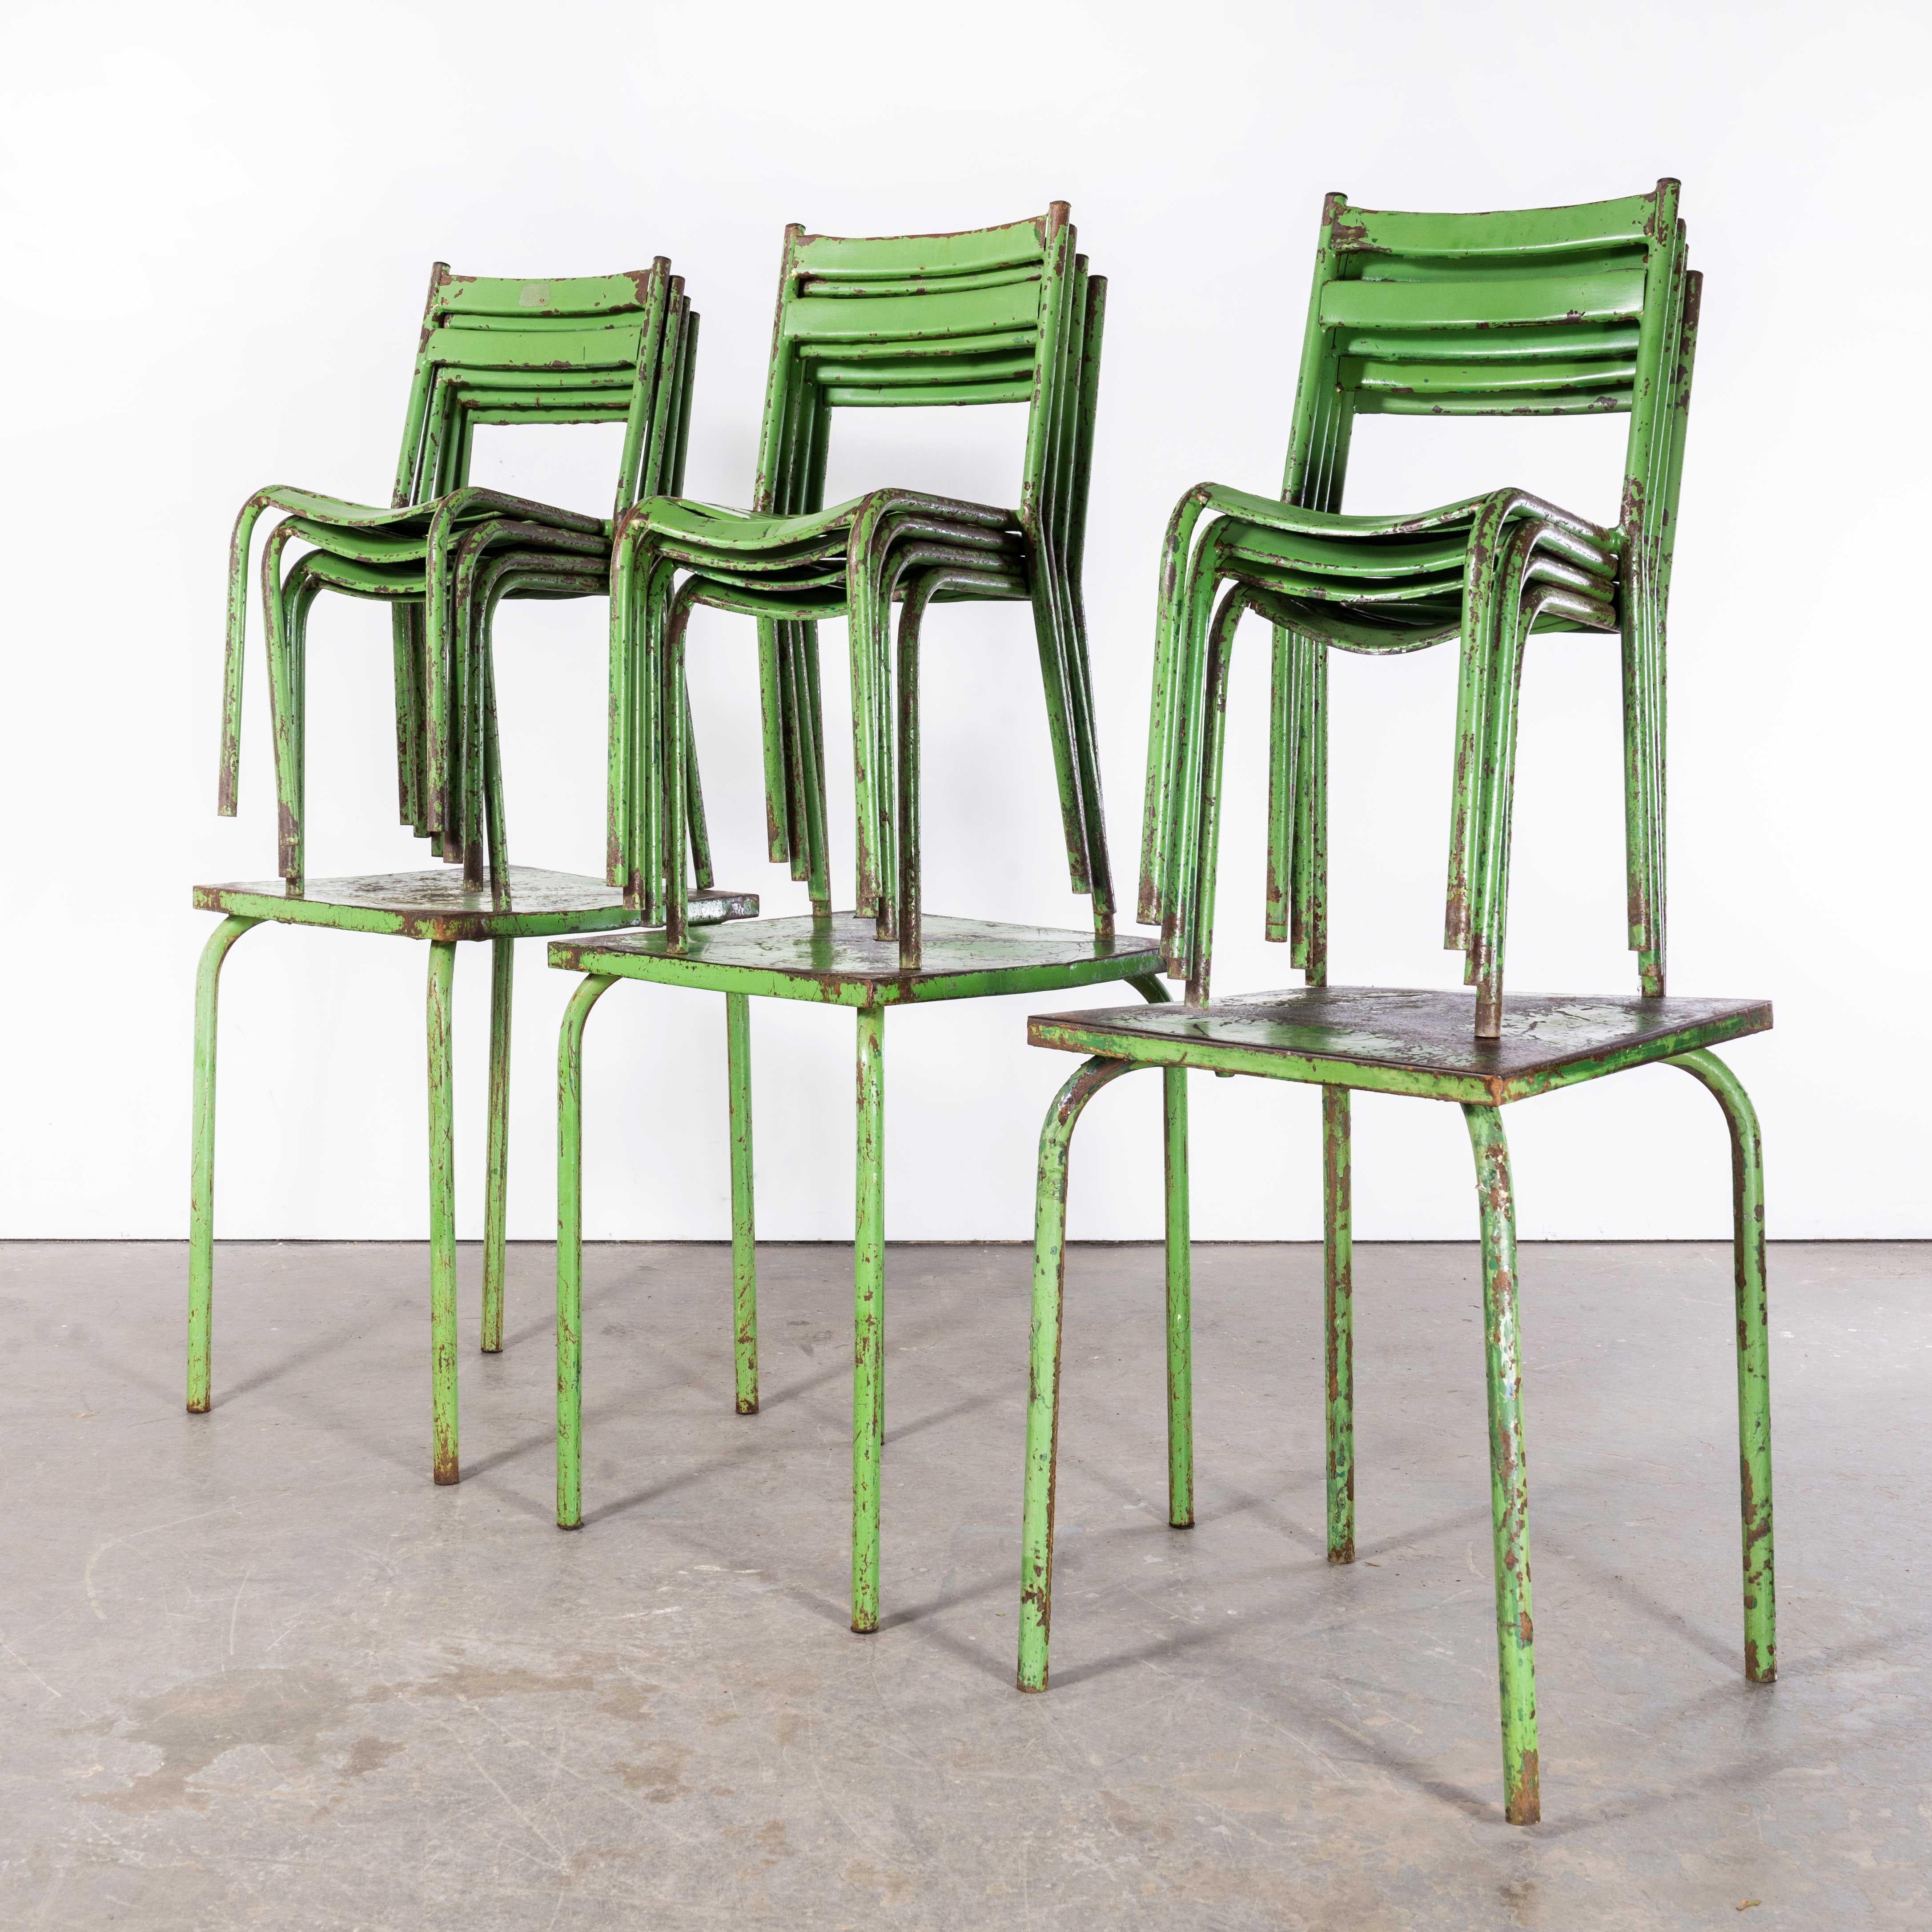 Metal 1950's Original French Outdoor Table And Chair Set - Four Chairs